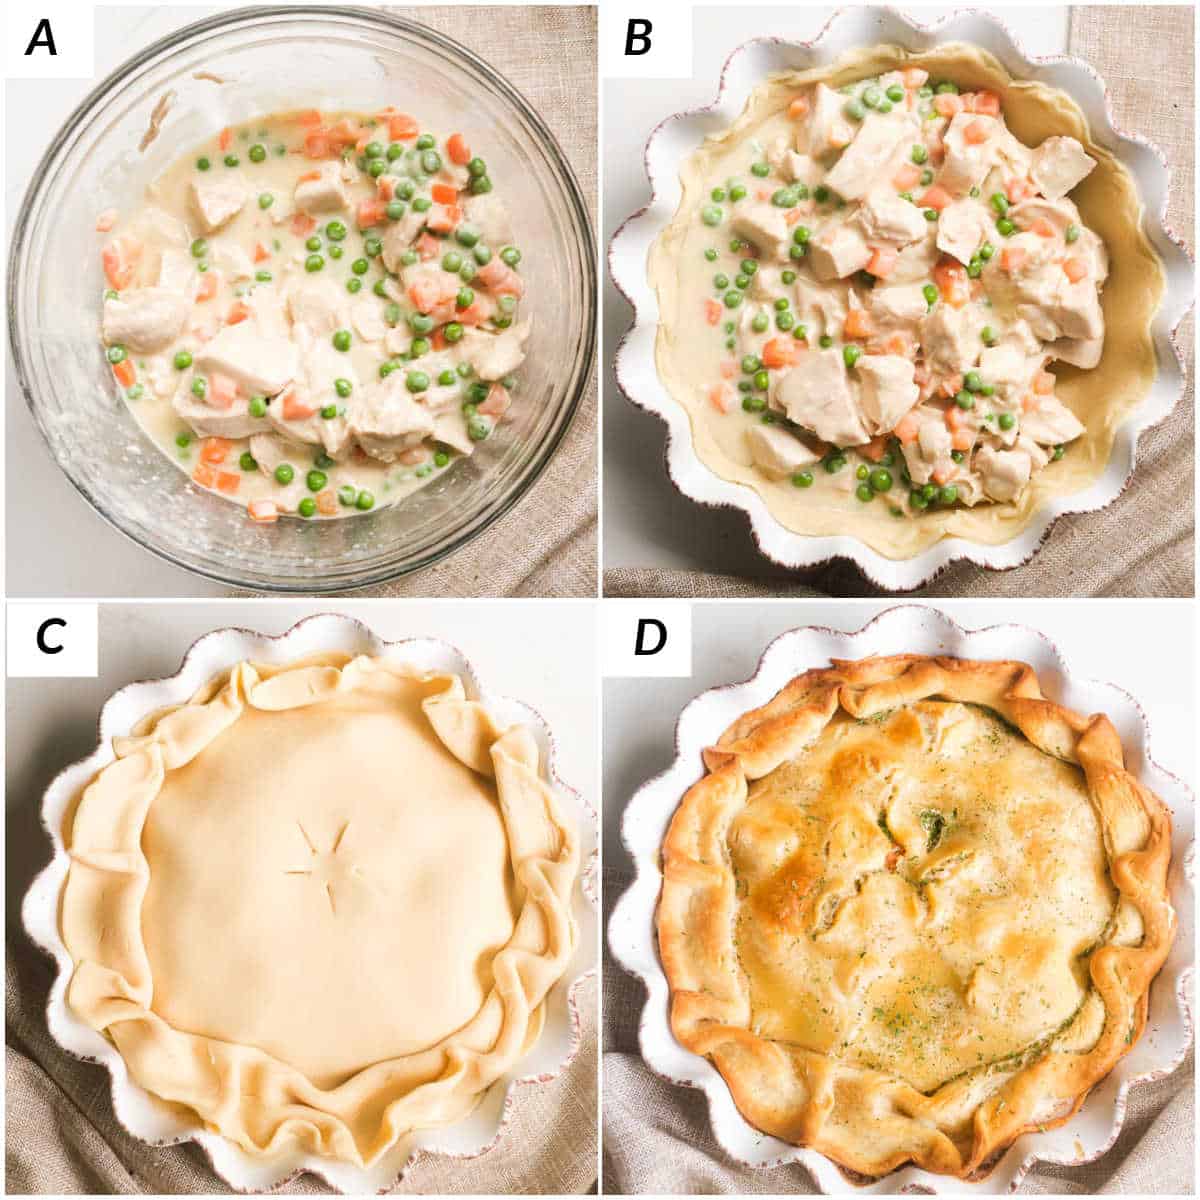 image collage showing the steps for making chicken pot pie